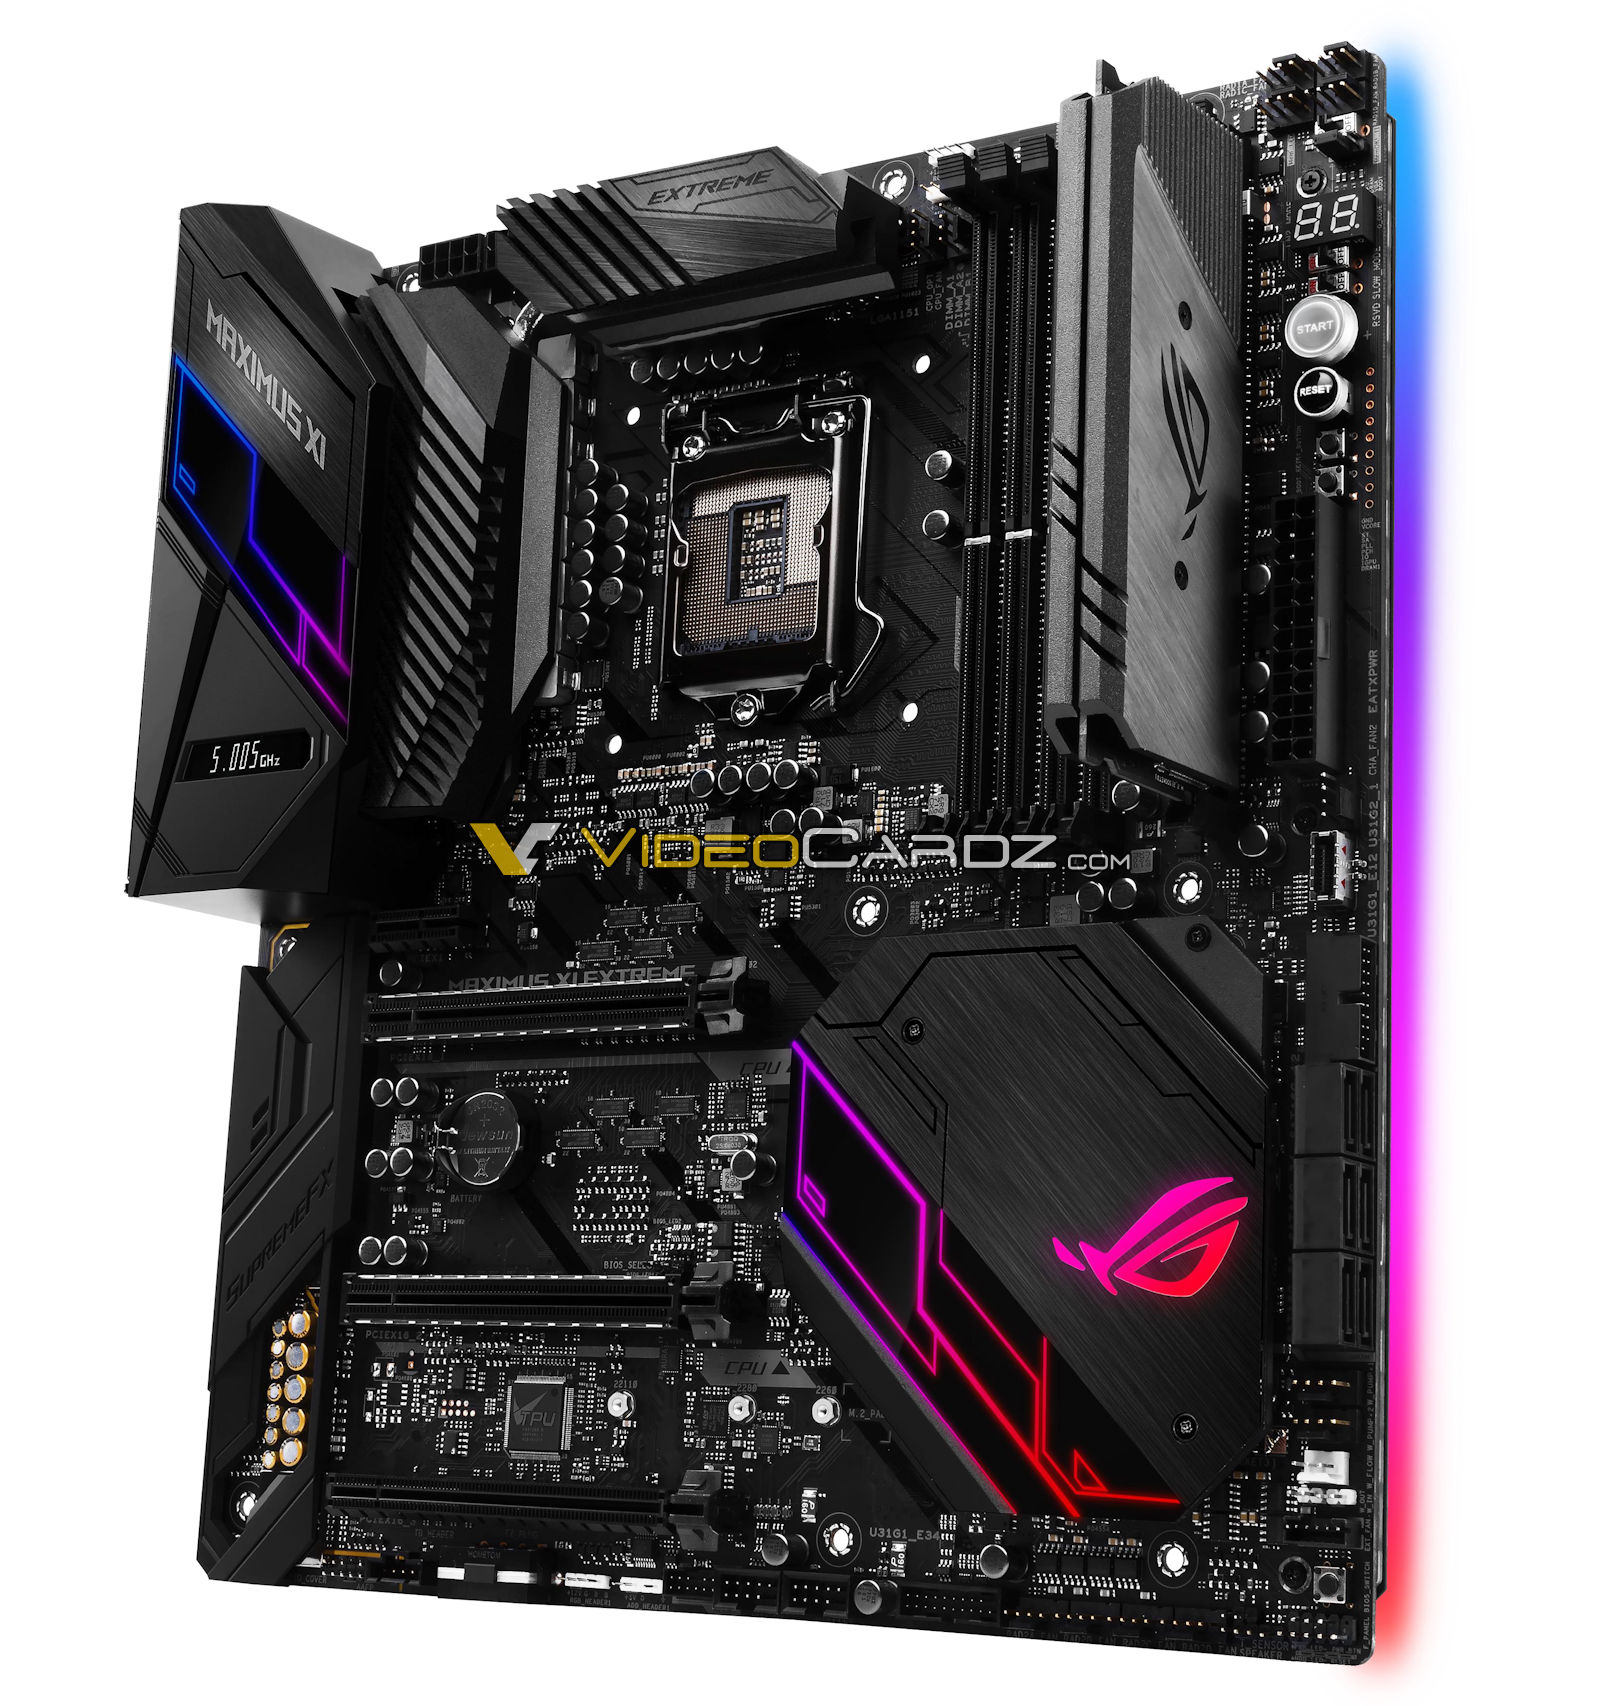 ASUS Z390 Maximus XI EXTREME and Gene leaked - VideoCardz.com